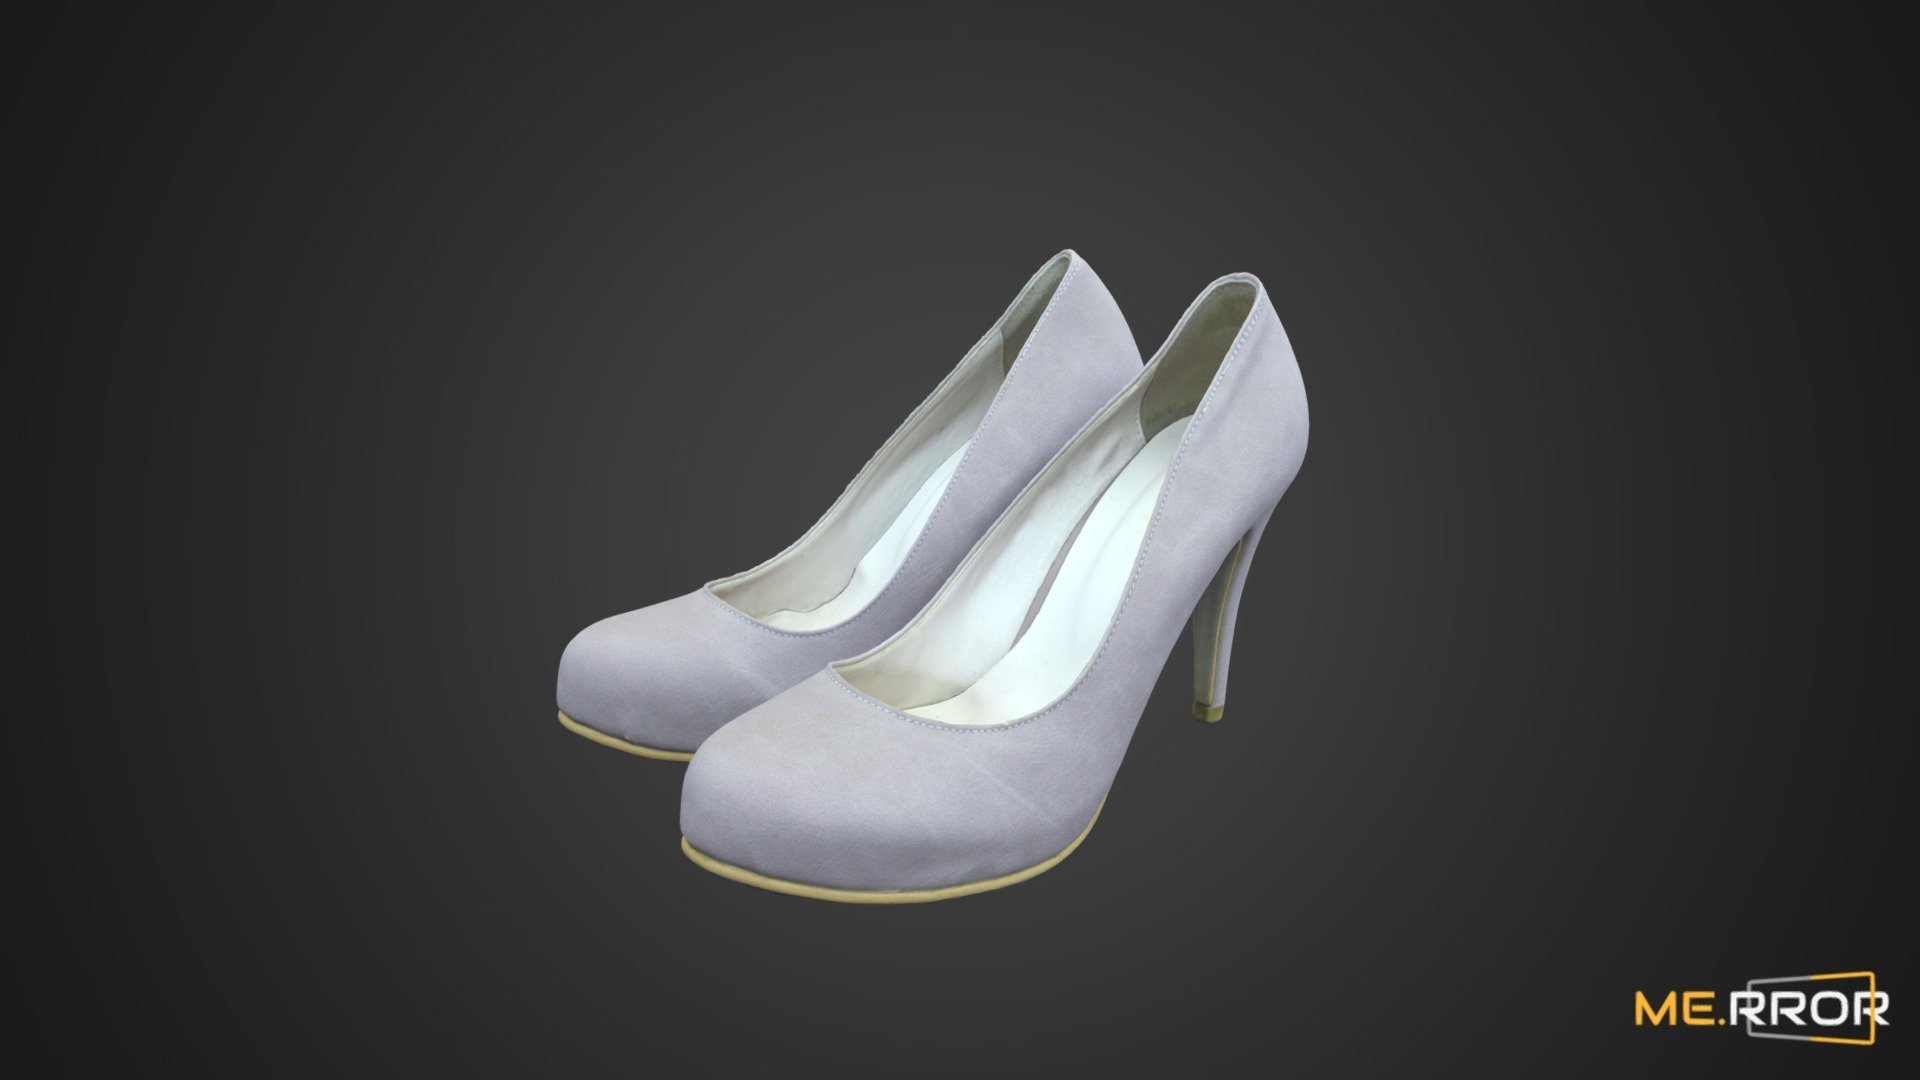 MERROR is a 3D Content PLATFORM which introduces various Asian assets to the 3D world


3DScanning #Photogrametry #ME.RROR - Woman's High Heels - Buy Royalty Free 3D model by ME.RROR (@merror) 3d model